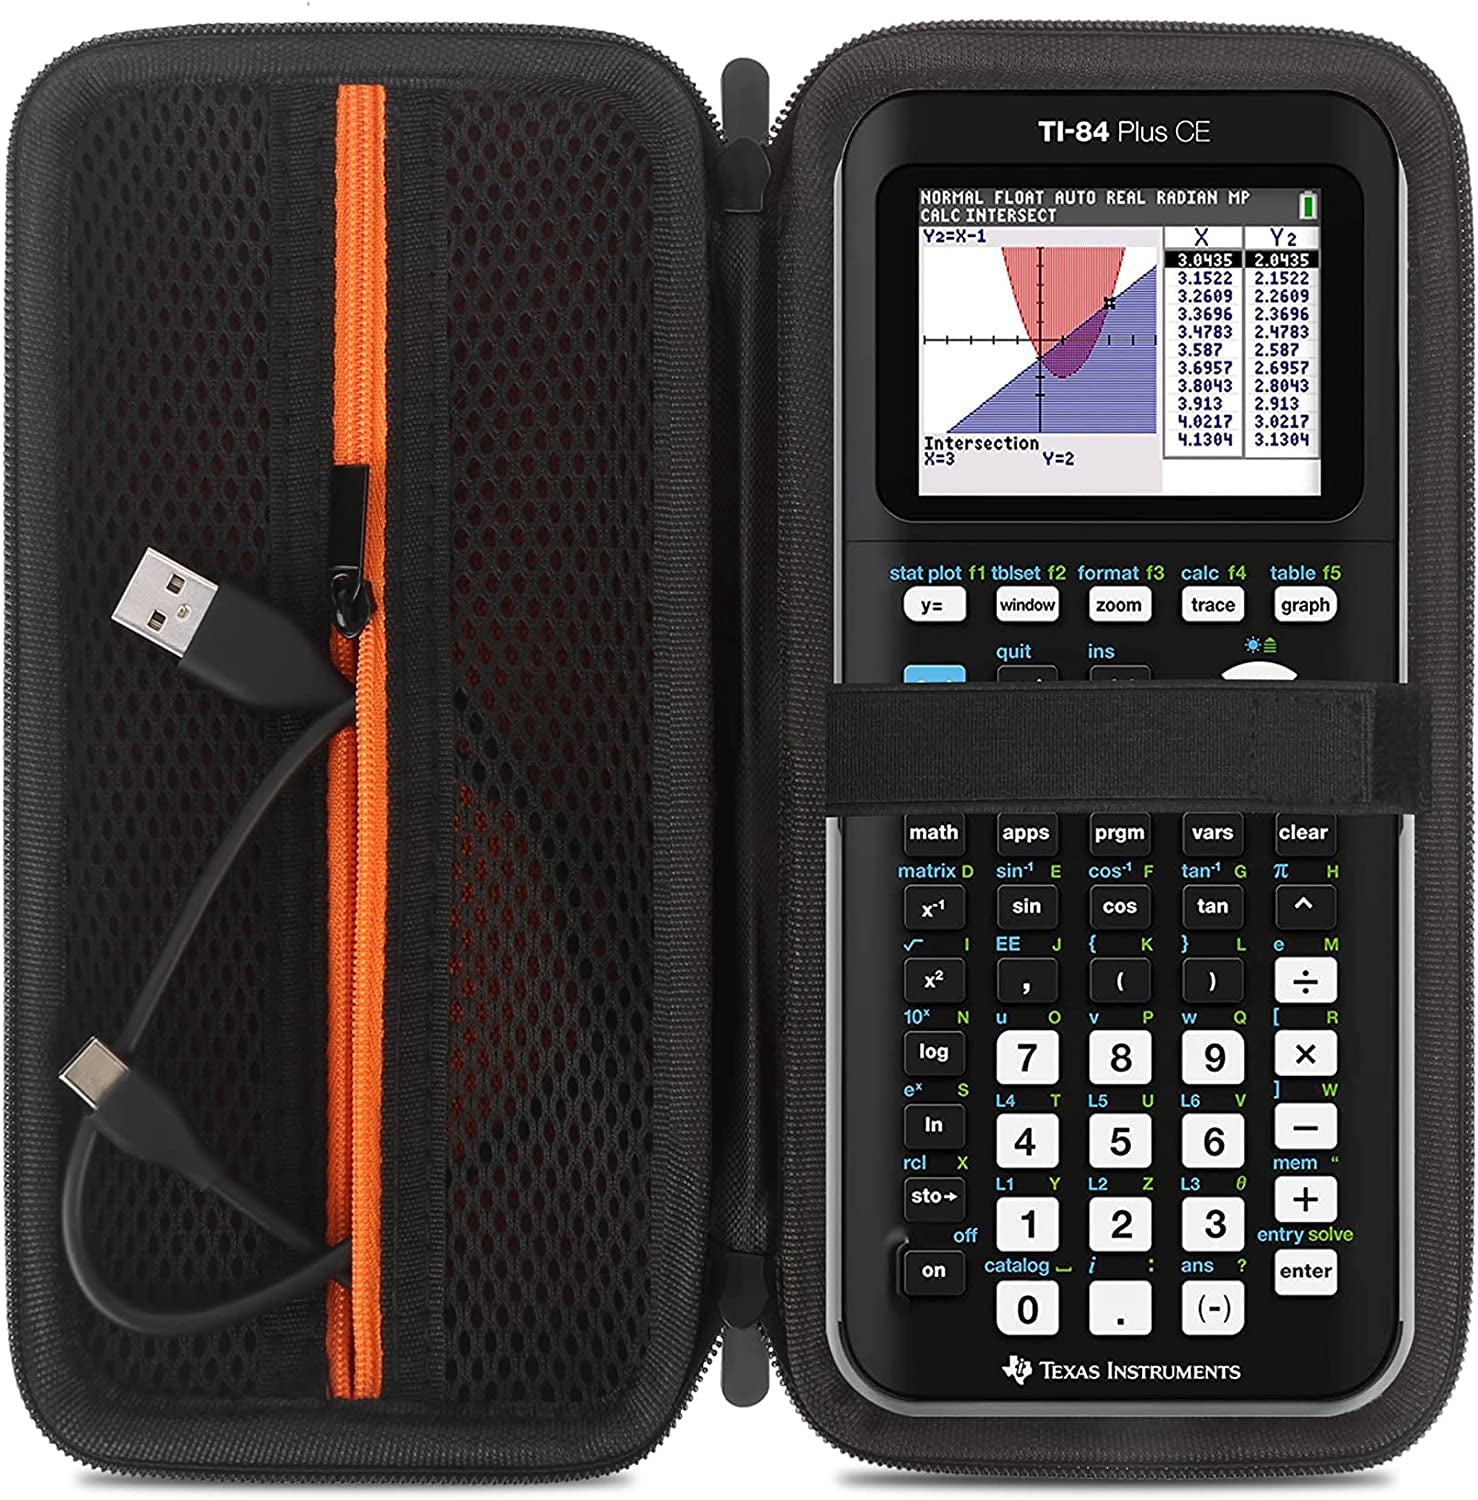 Hard Travel Case for Texas Instruments TI-84 plus CE/TI-84 Plus/Ti-83 plus CE Color Graphing Calculator, Extra Zipped Pocket Fit Charging Cable, Charger, Manual, Black